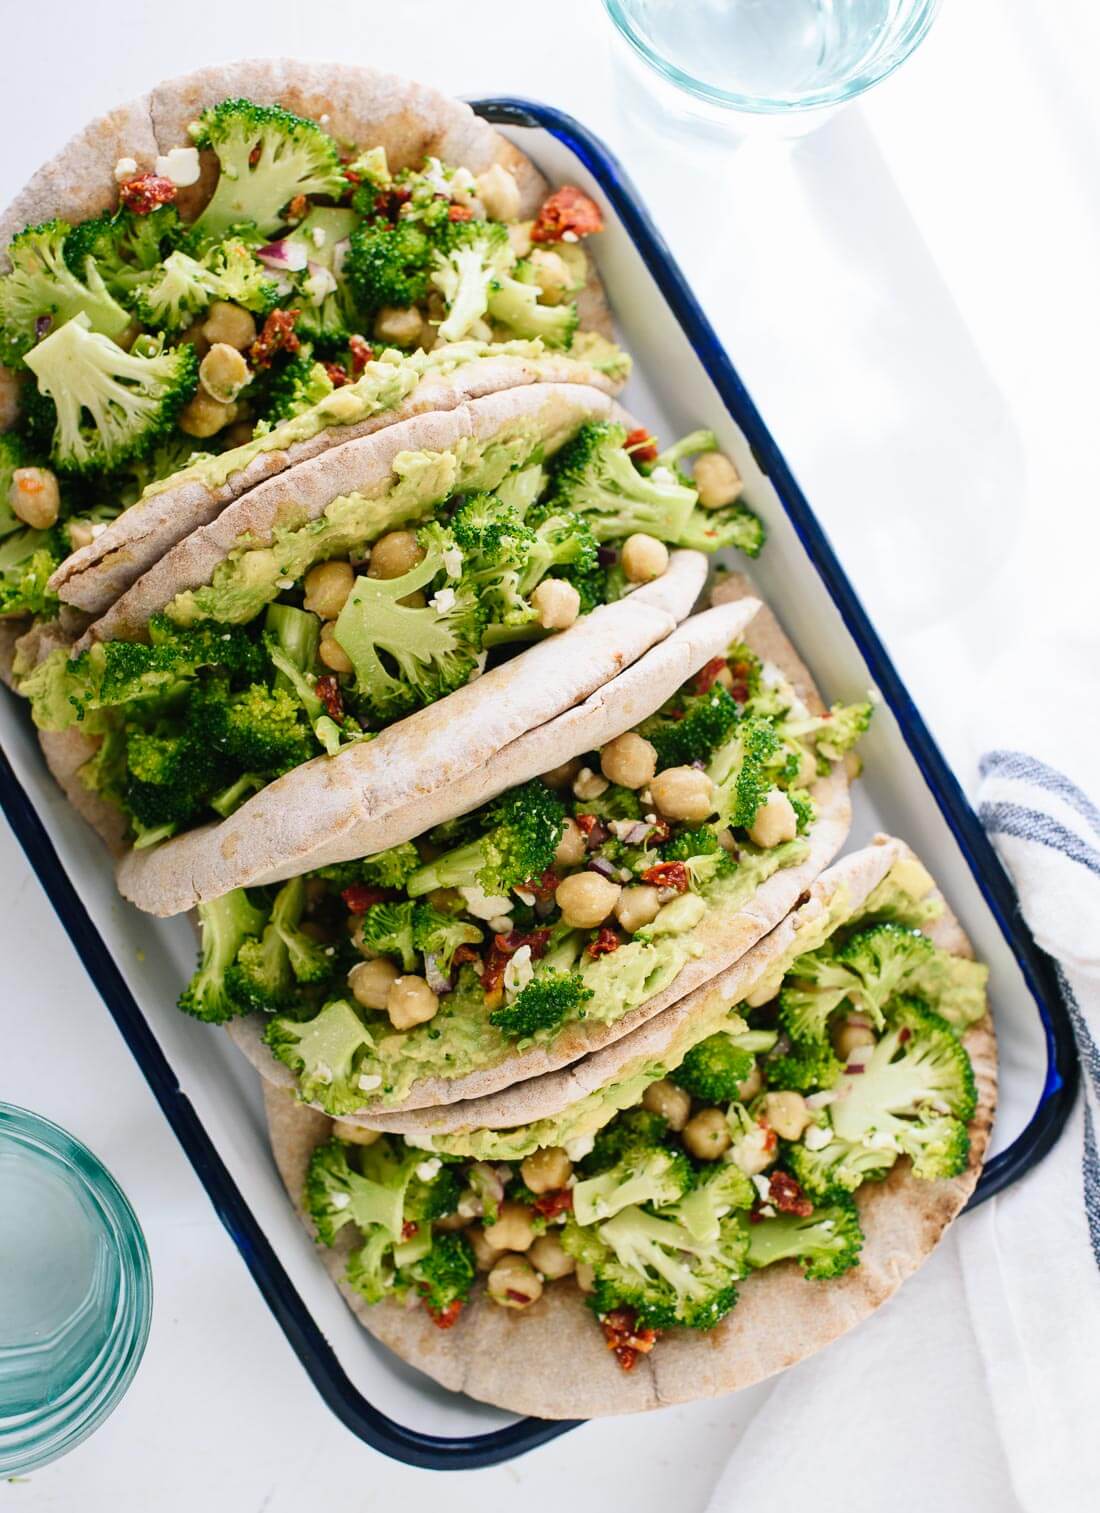 Simple, fresh lunch of broccoli chickpea pita sandwiches - get the recipe at cookieandkate.com